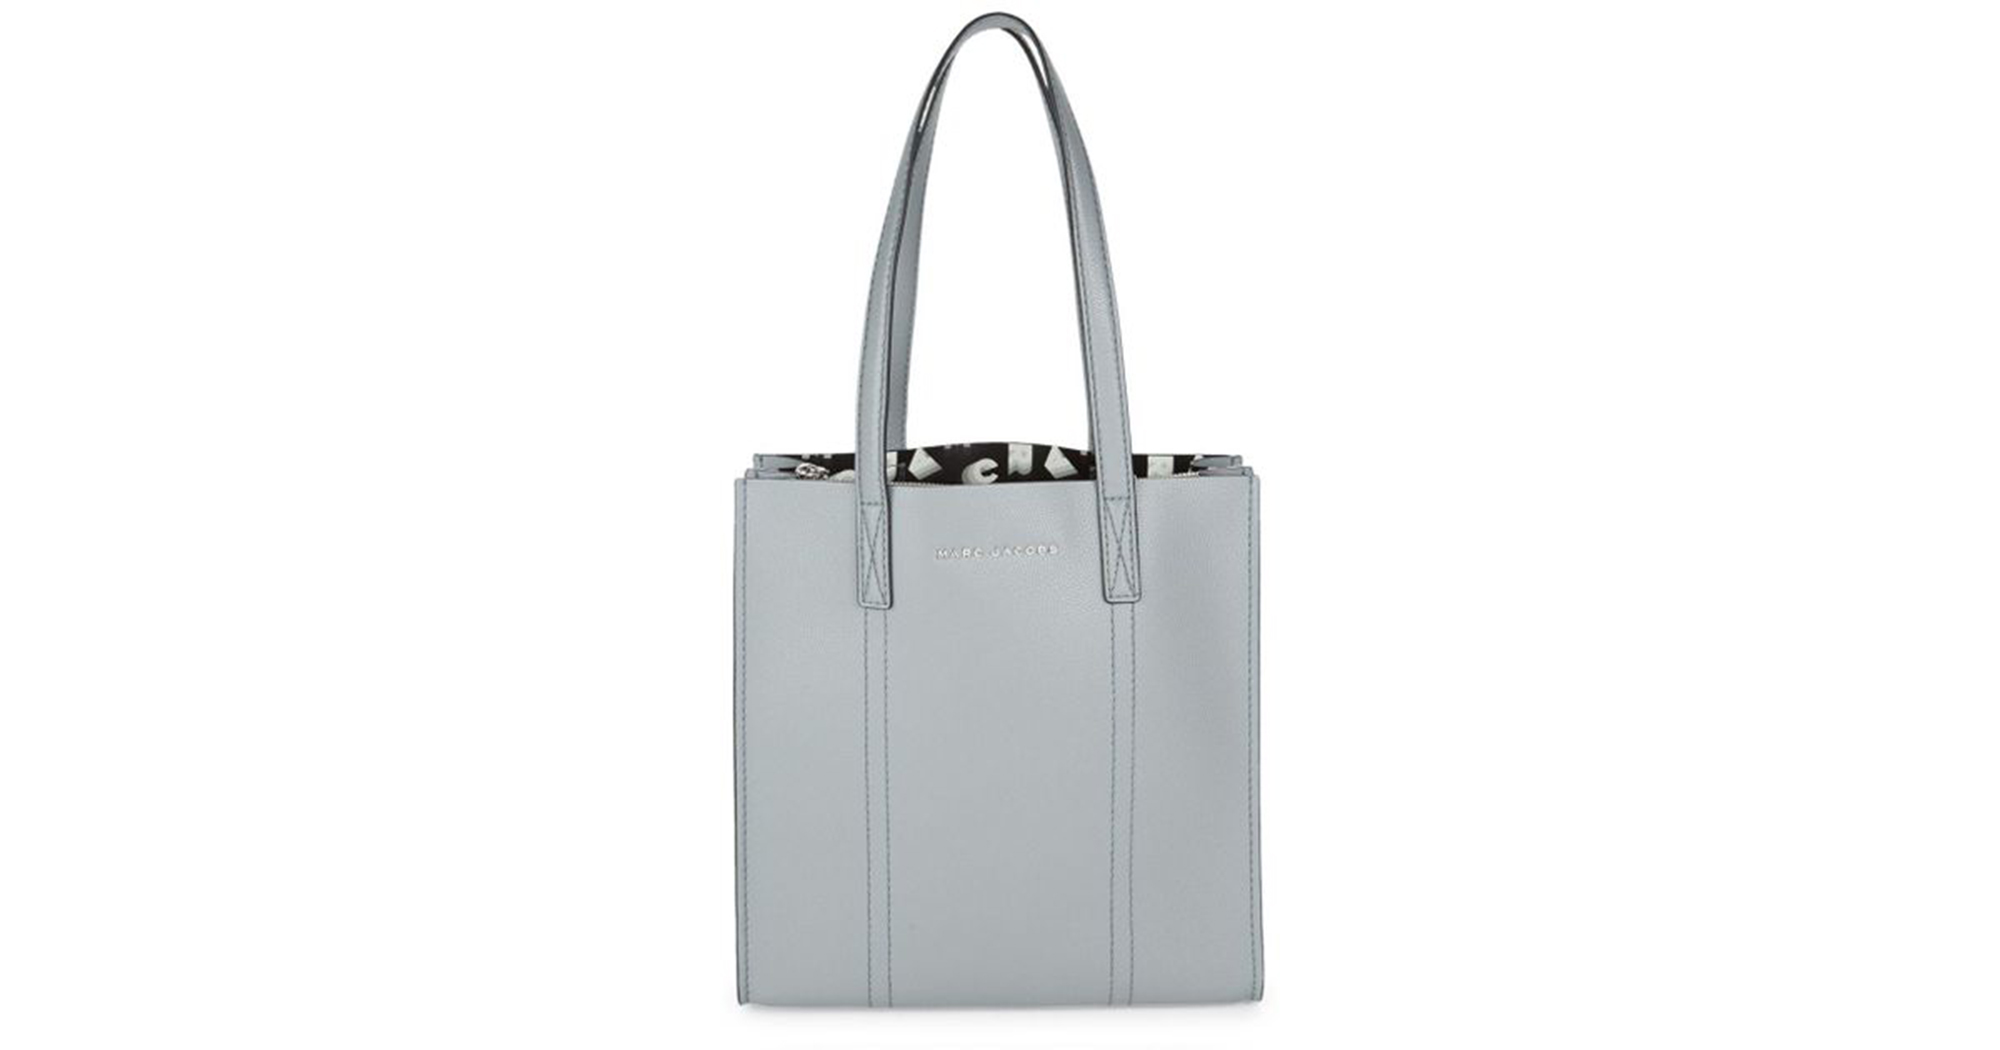 Rating THE TOTE BAG BY MARC JACOBS  My everyday work bag amyrivasrealtor  #realtorlife #review 